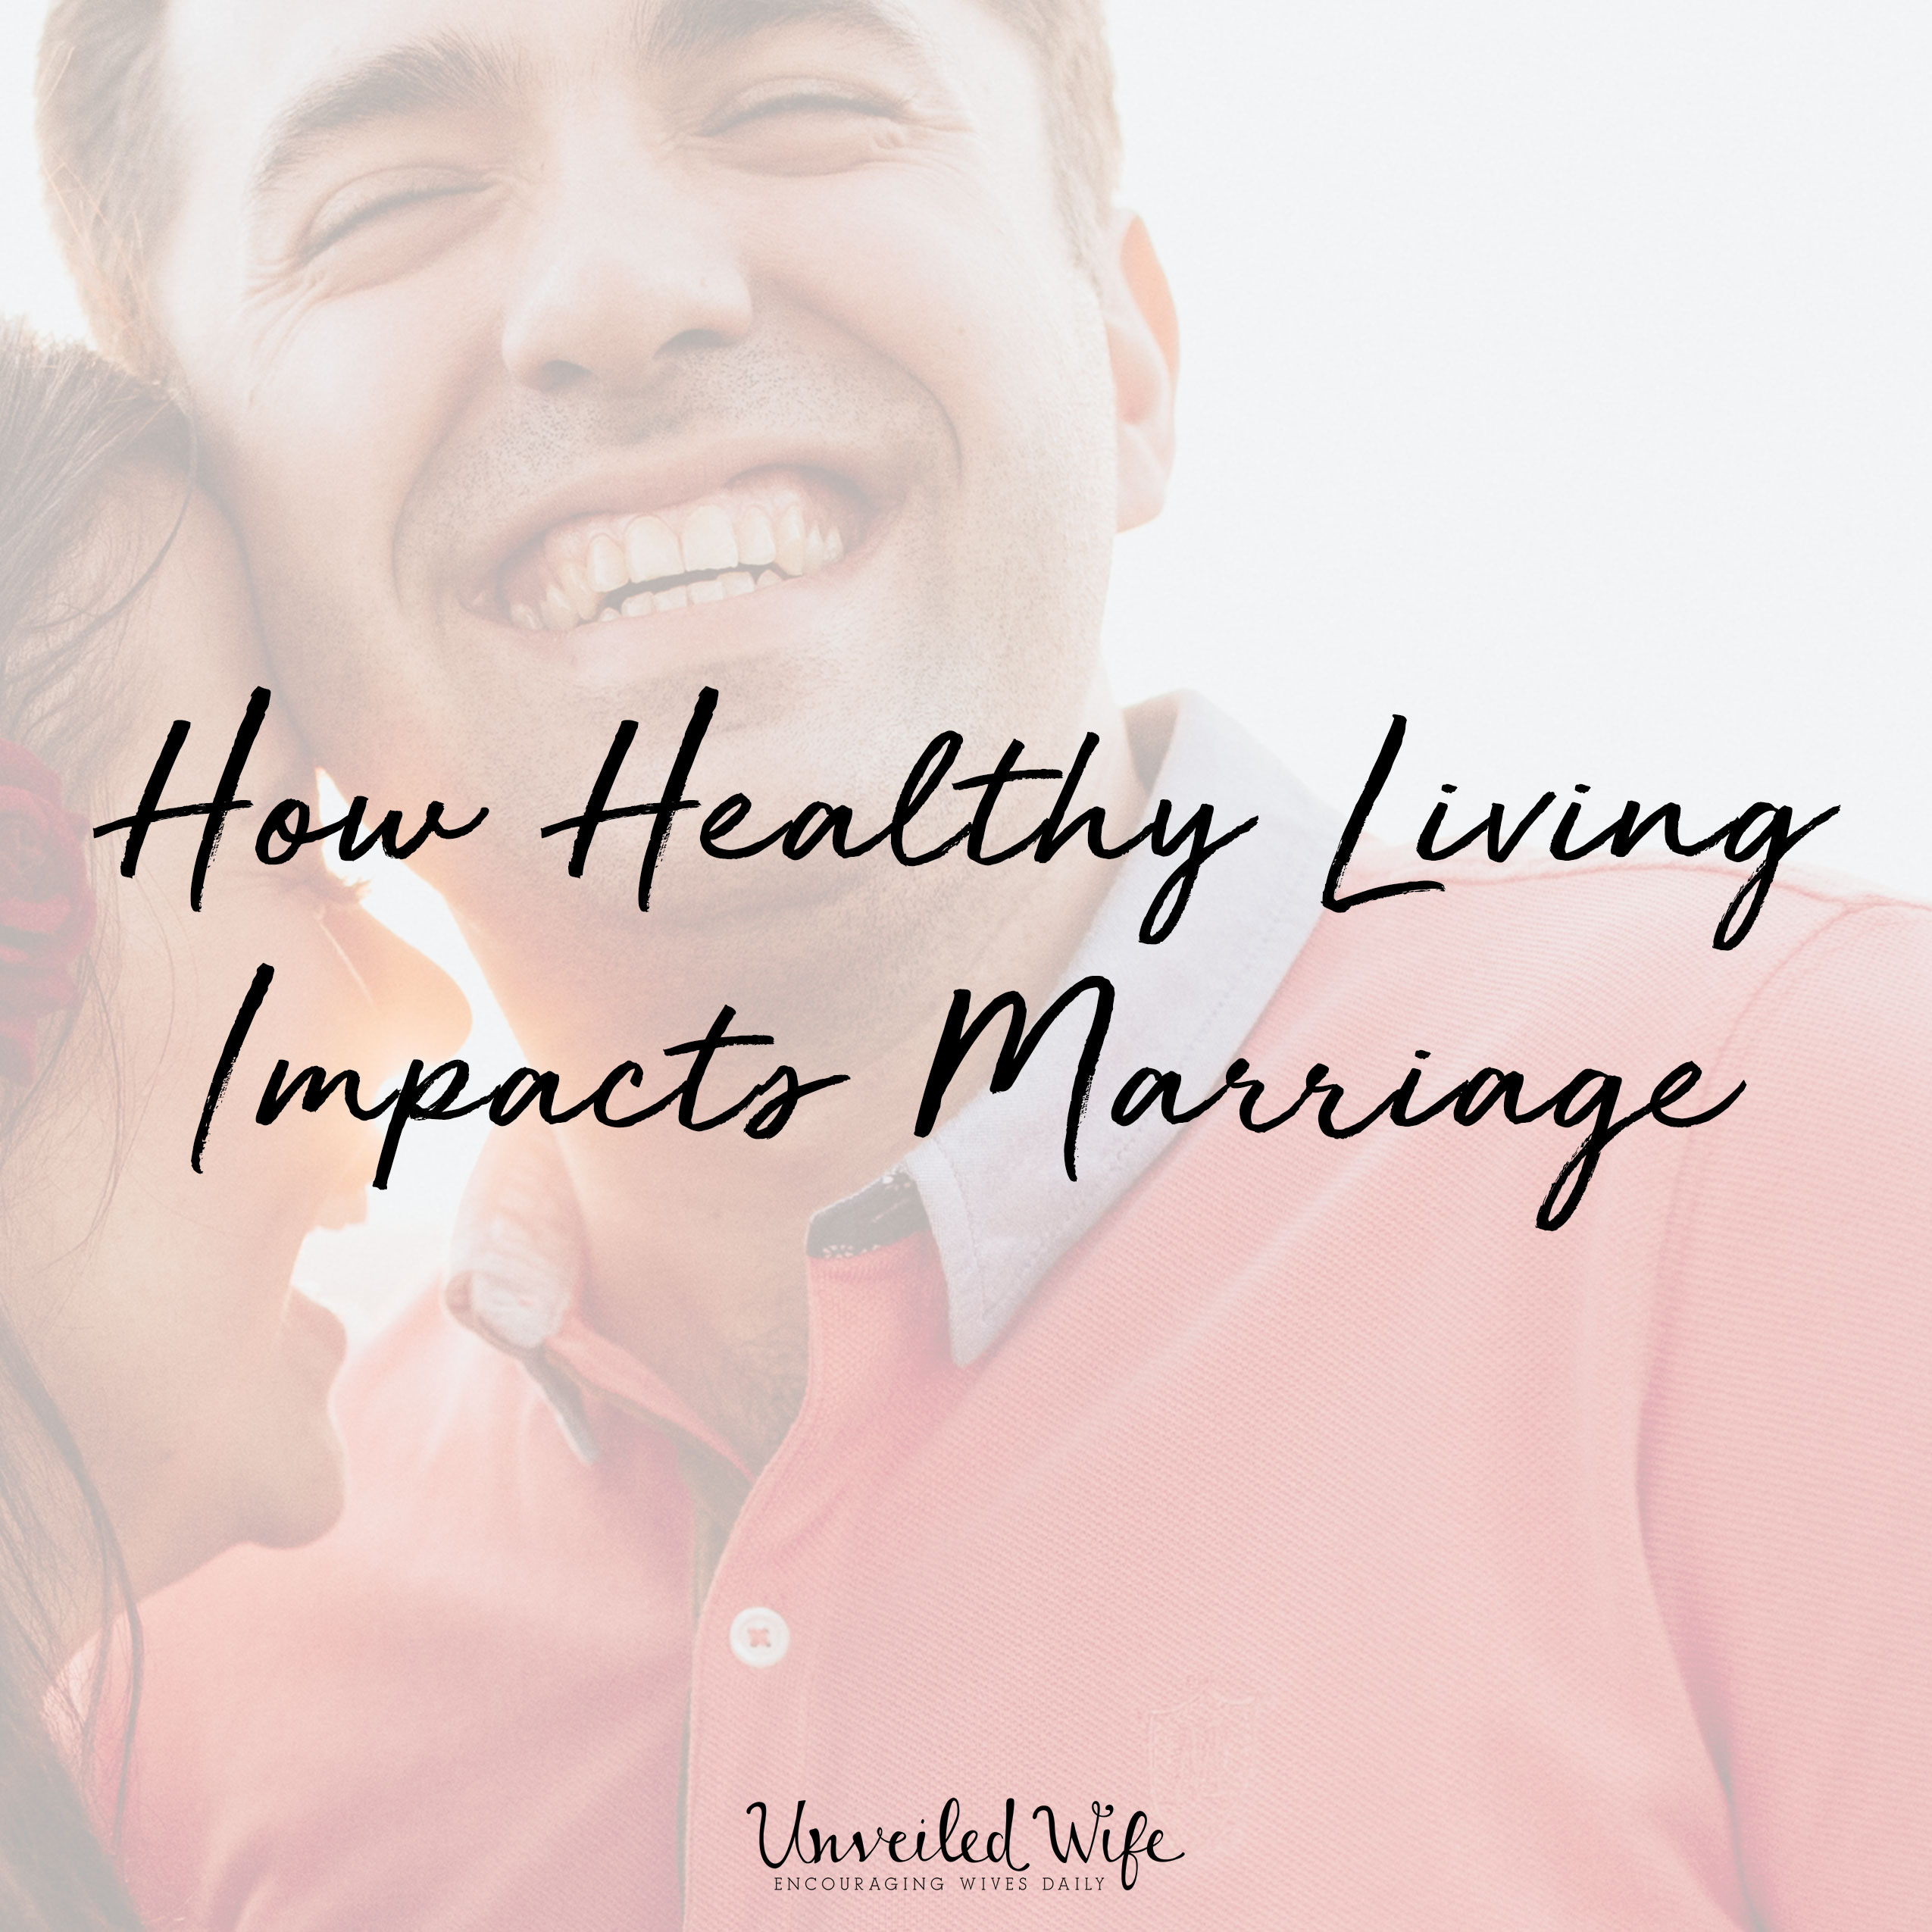 How Living Healthy Impacts Marriage